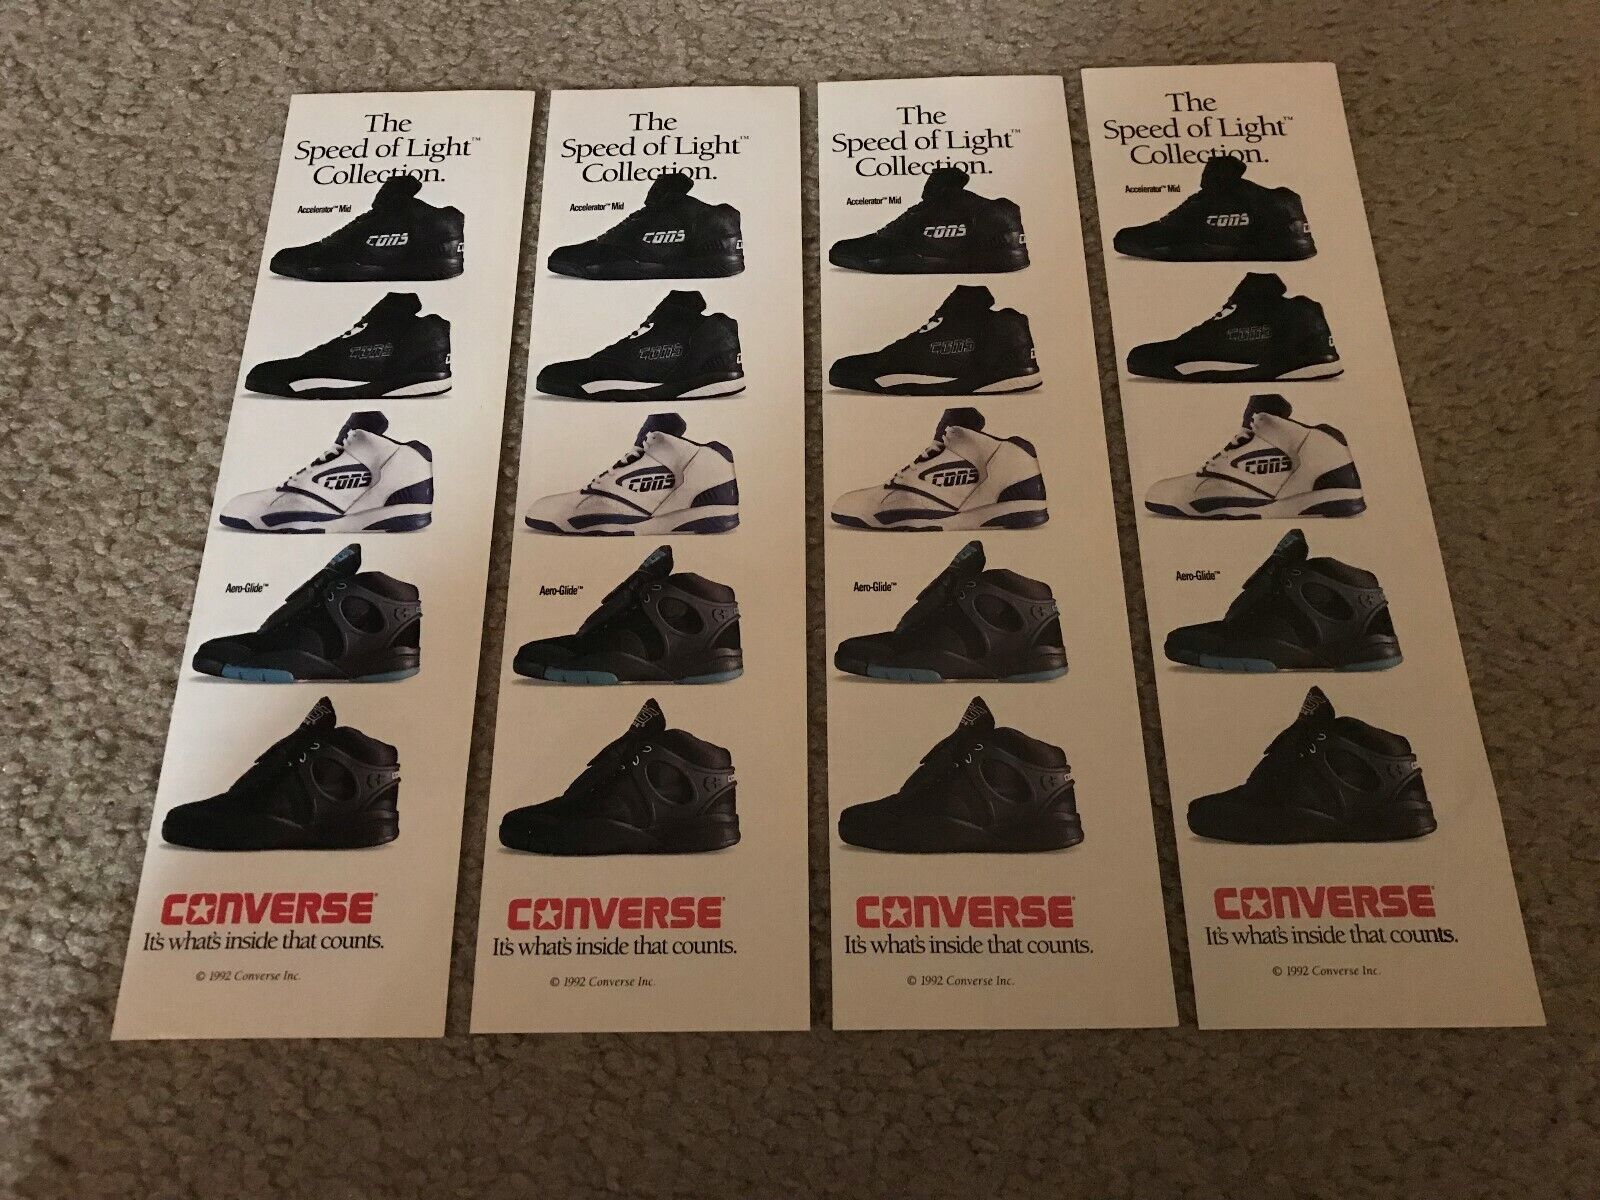 1992 CONVERSE ACCELERATOR MID AERO-GLIDE Basketball Shoes Poster Print Ad Lot x4